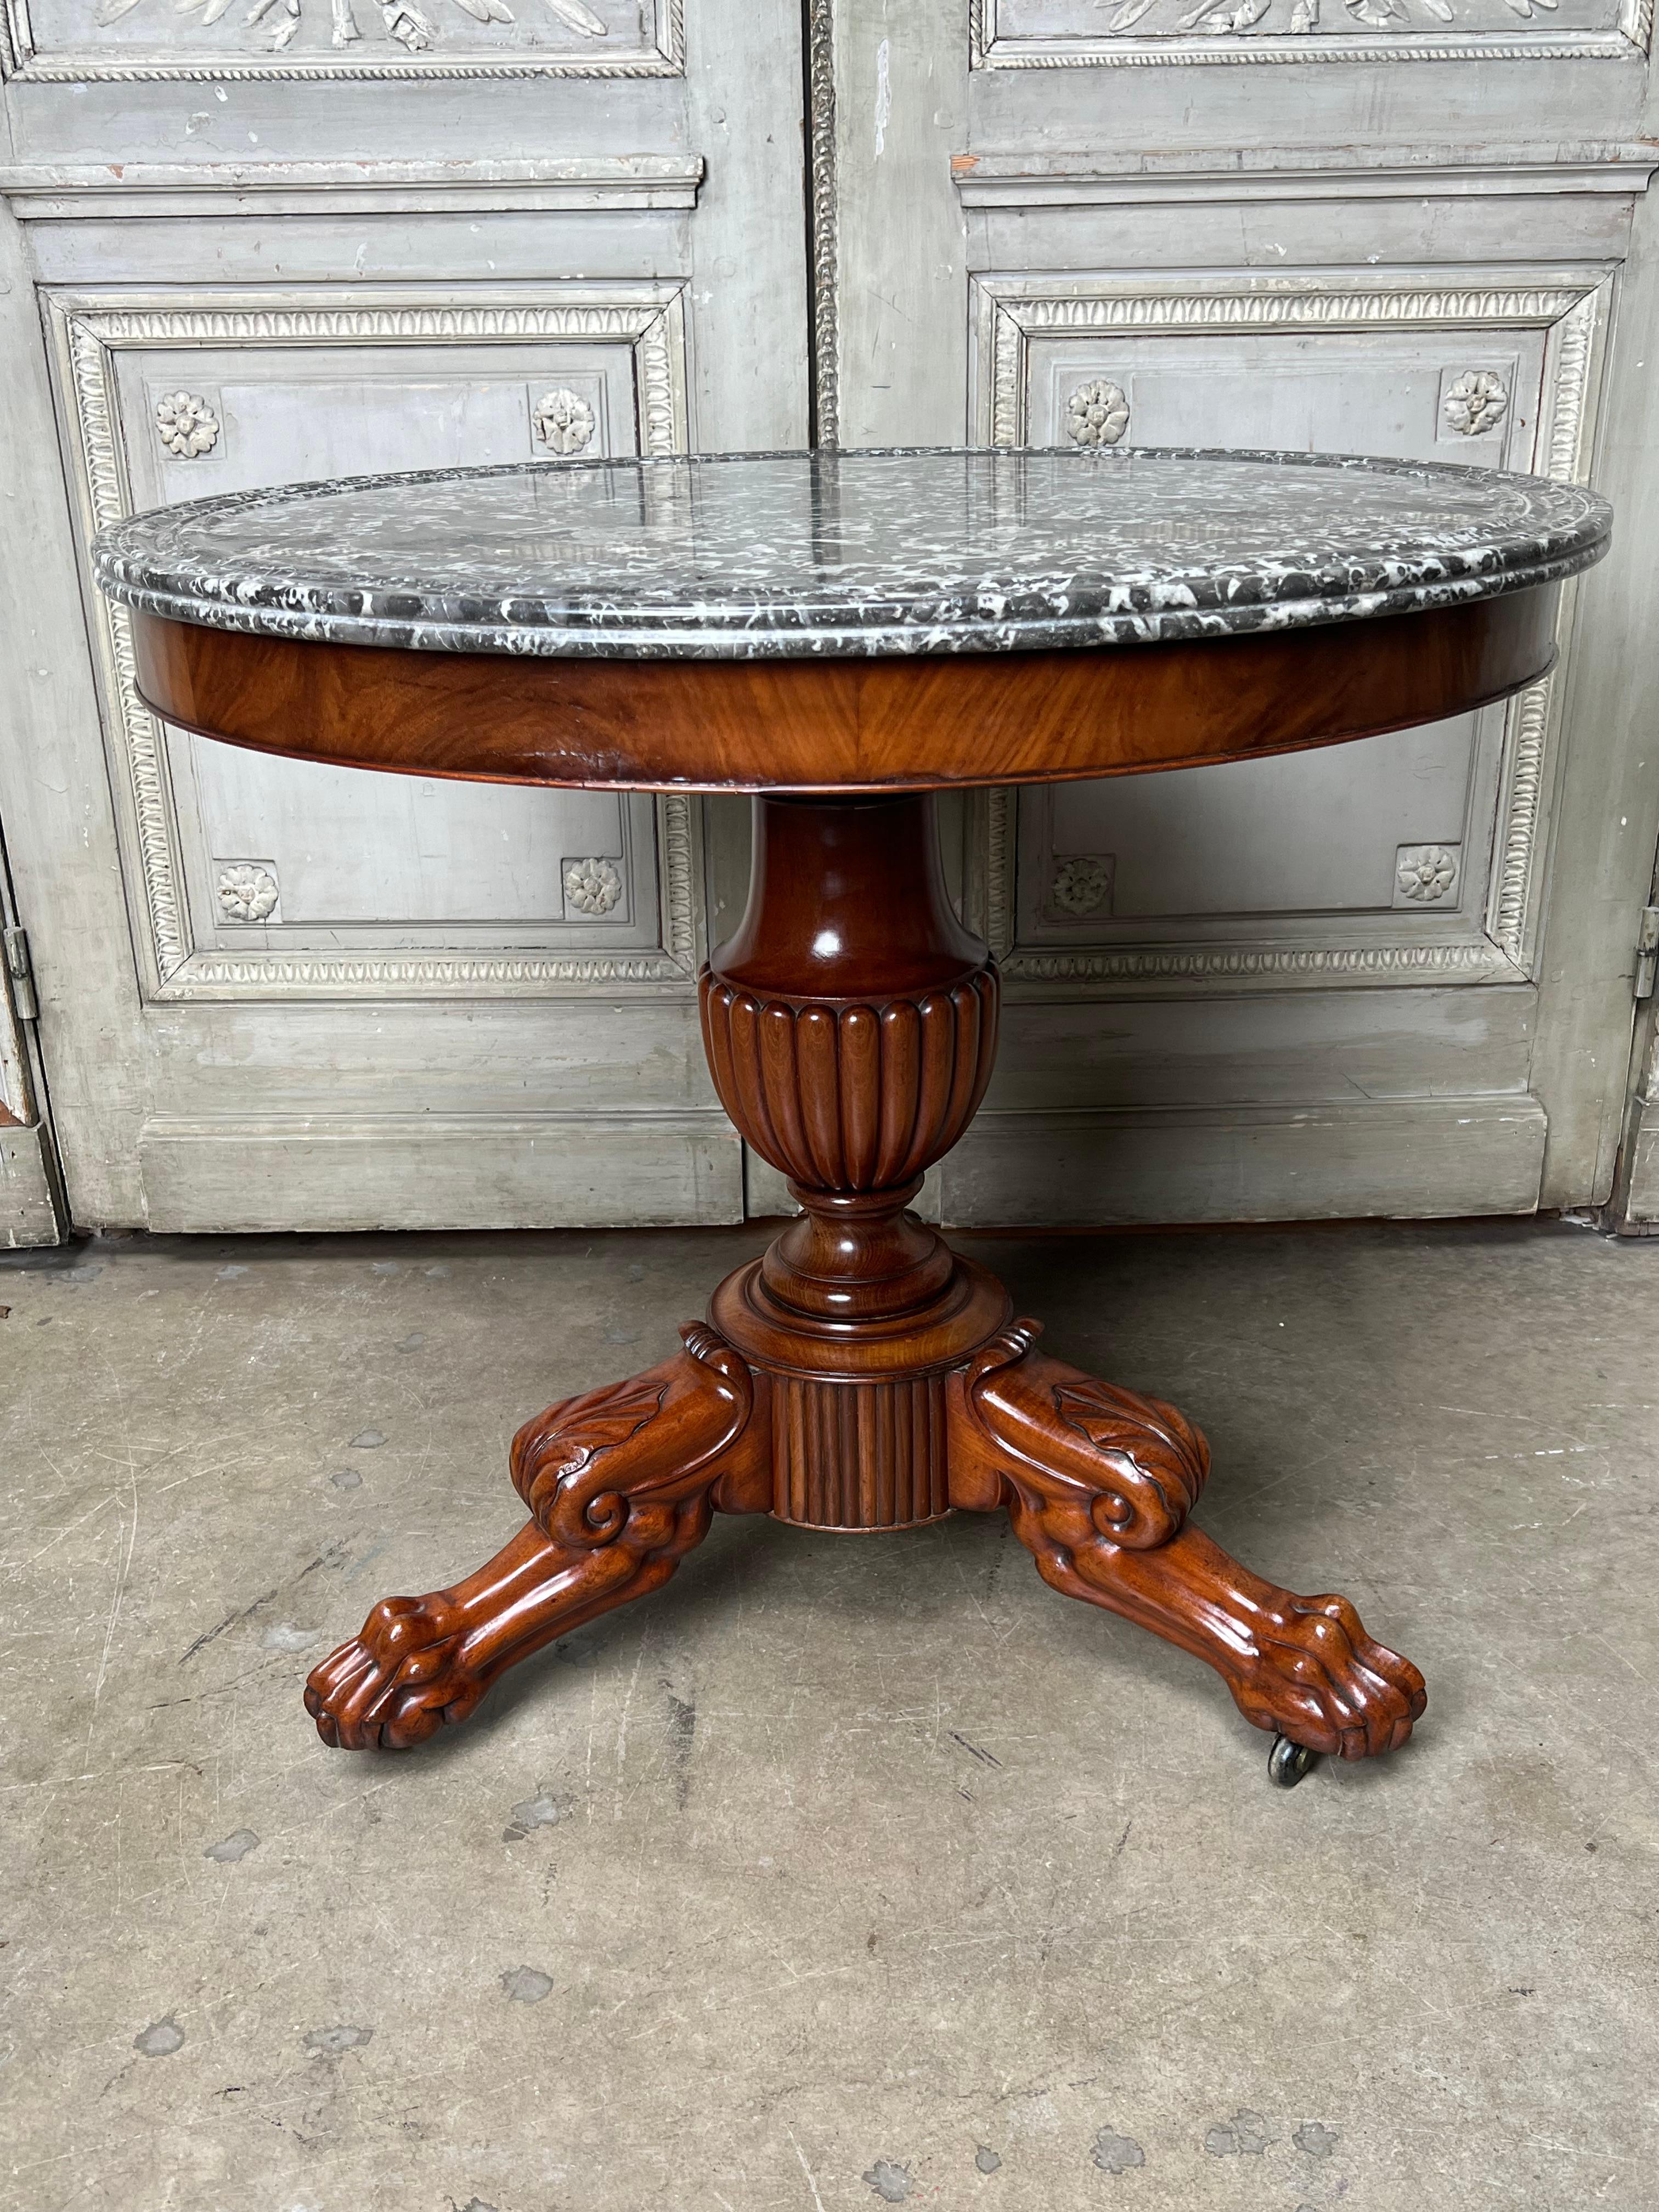 A French Charles X gueridon center table in mahogany with a marble top.
This beautiful table is a great size and could be used next to a sofa or bed or between a pair of chairs.  It has great deep carving and patina.  It has oak as its secondary